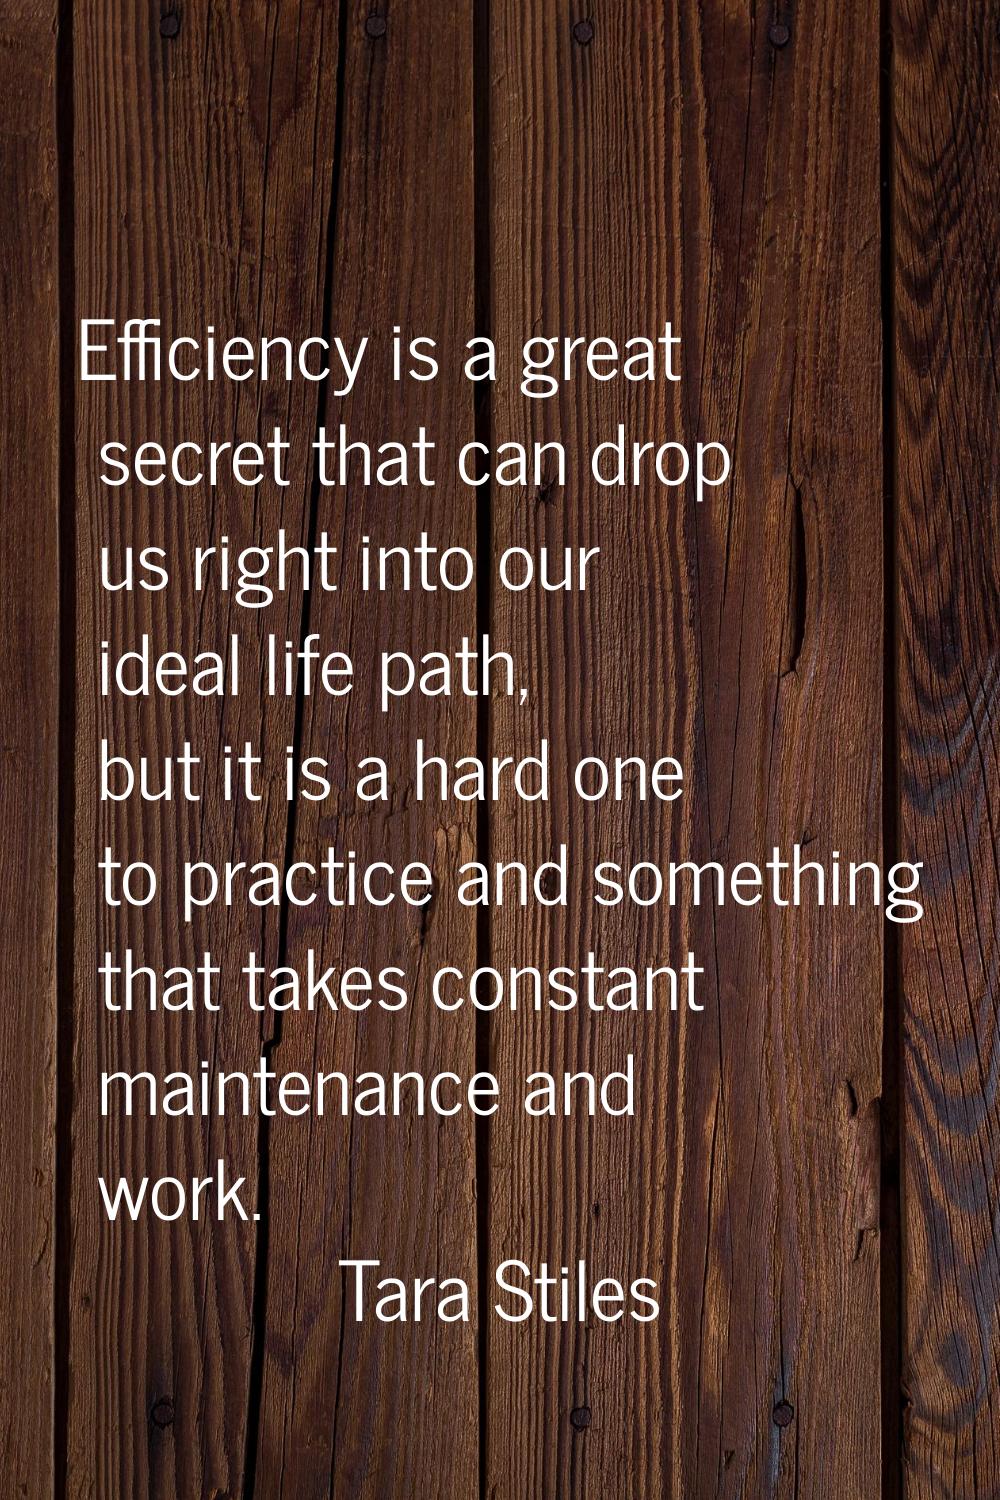 Efficiency is a great secret that can drop us right into our ideal life path, but it is a hard one 